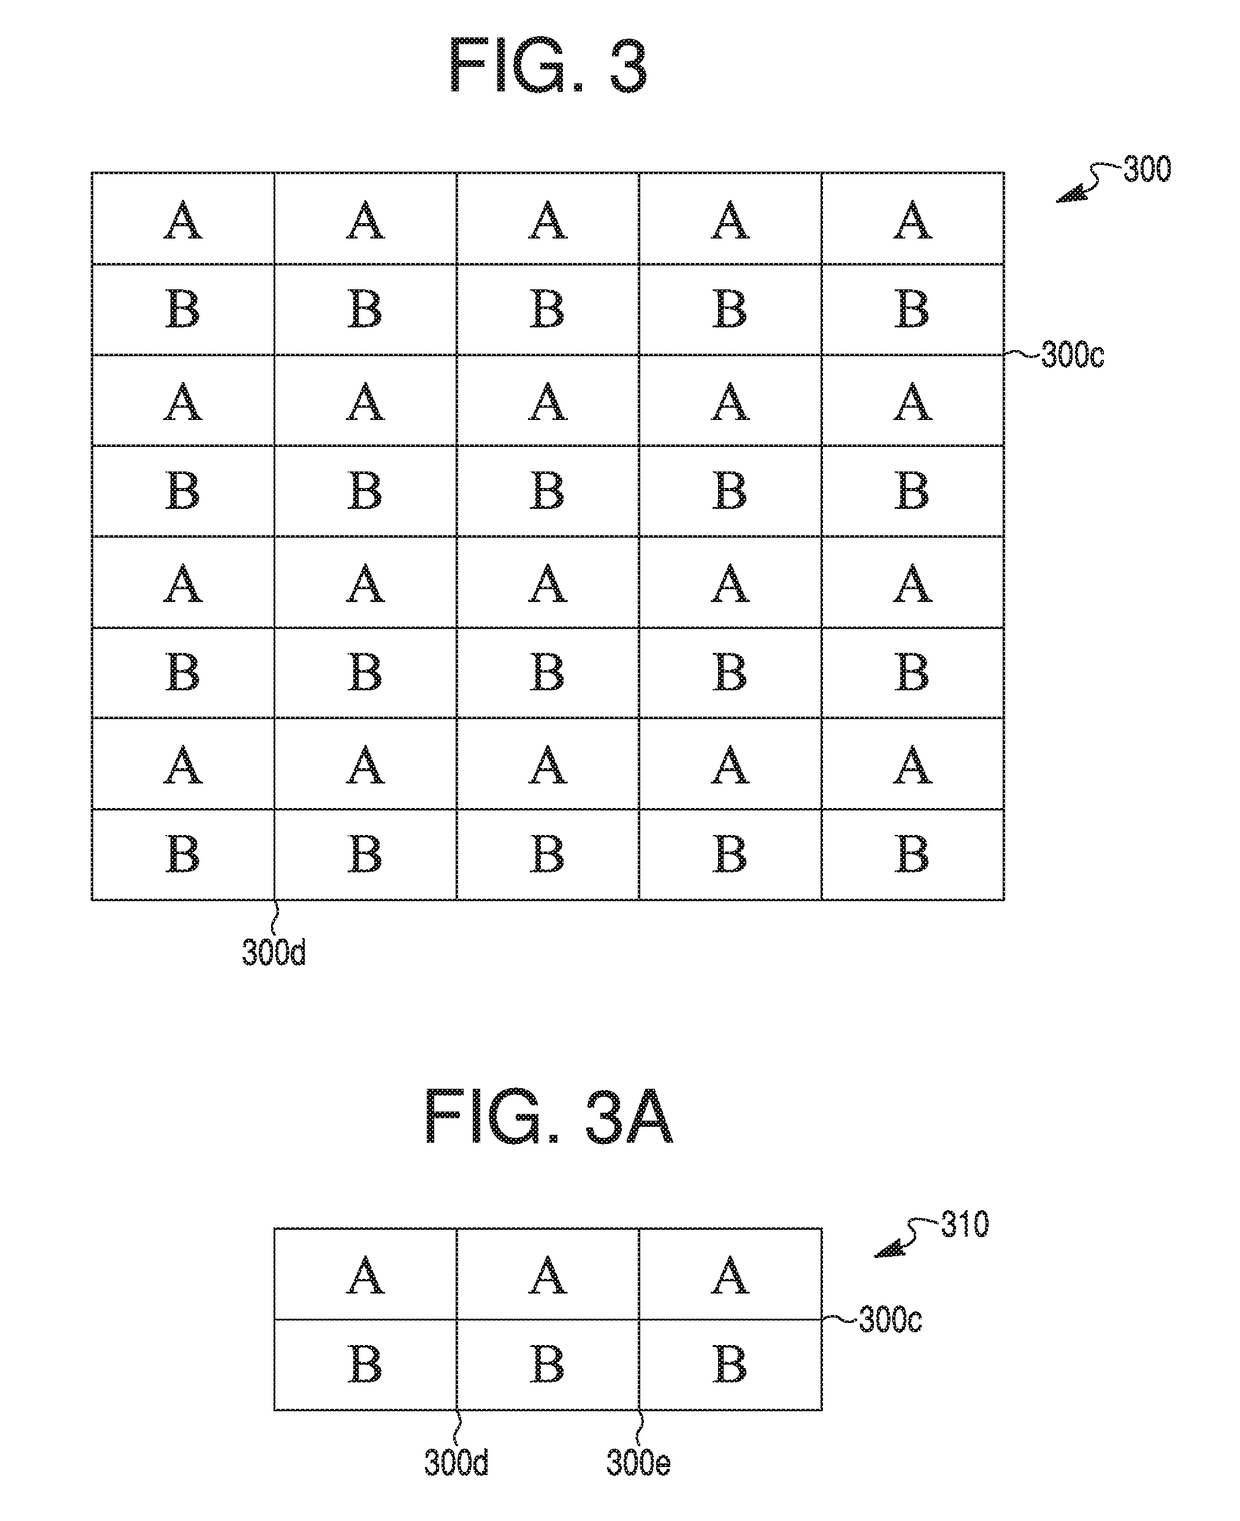 Article and method for a pharmaceutical agent